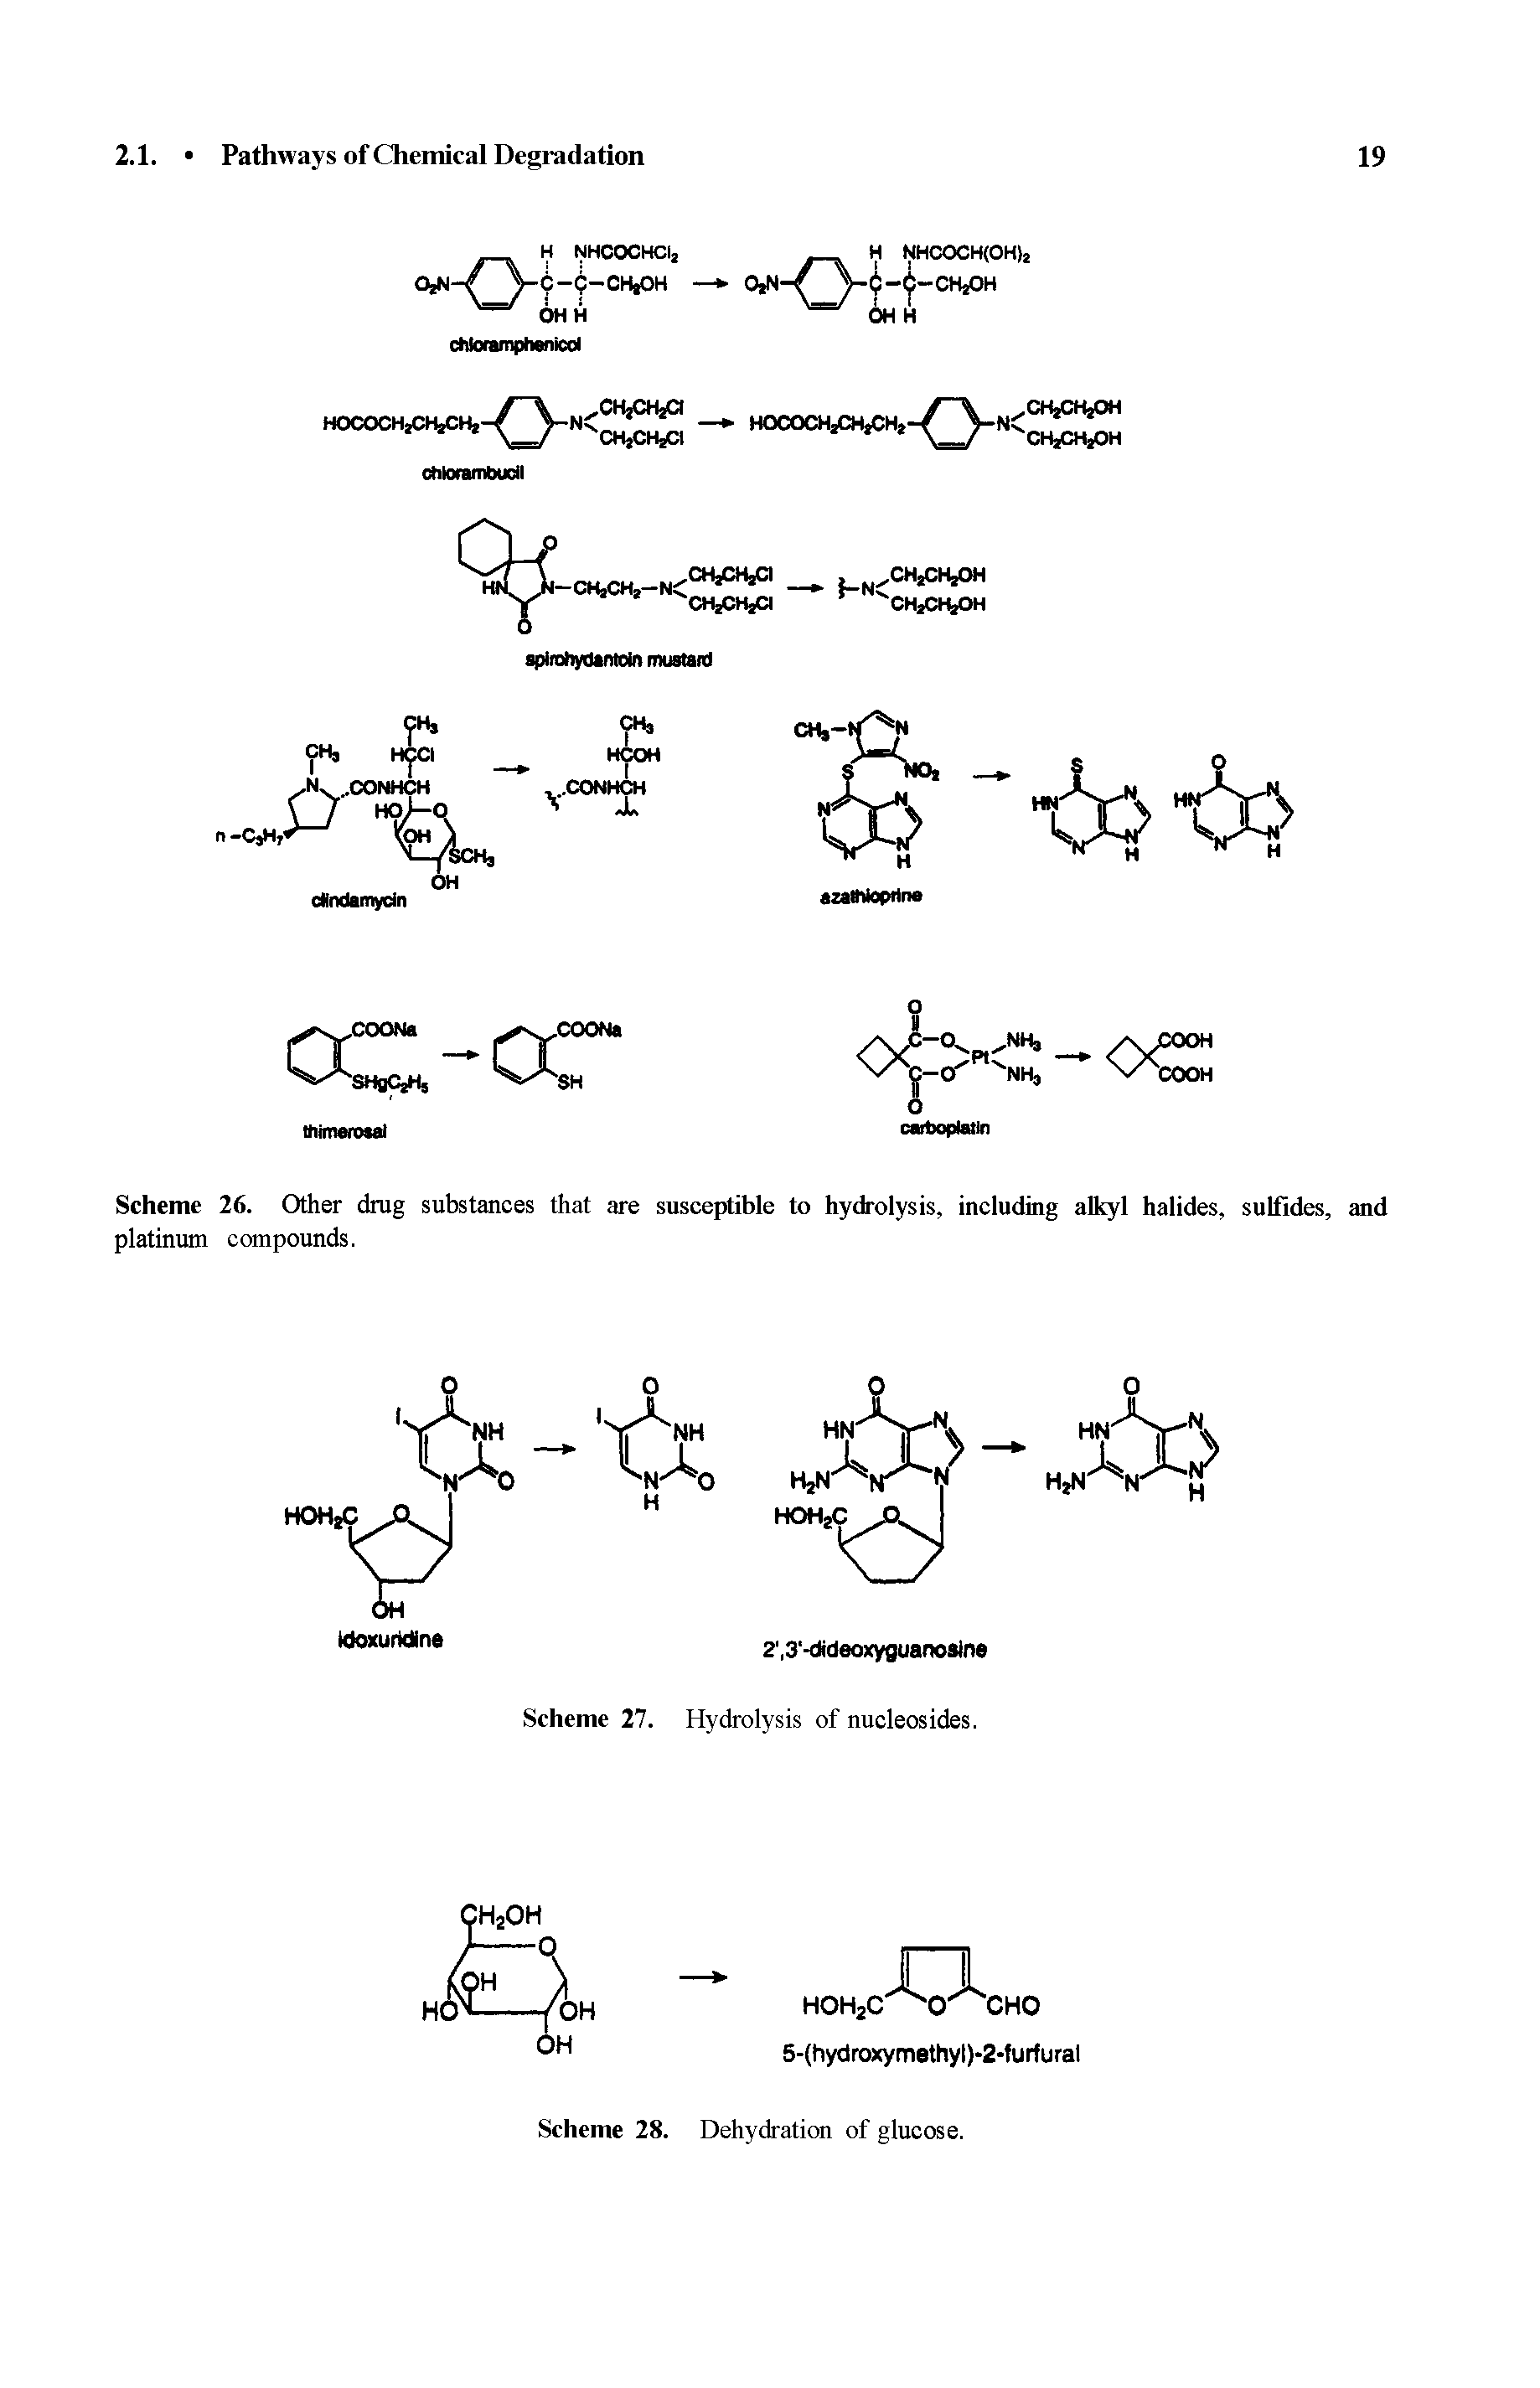 Scheme 26. Other drug substances that are susceptible to hydrolysis, including alkyl halides, sulfides, and platinum compounds.